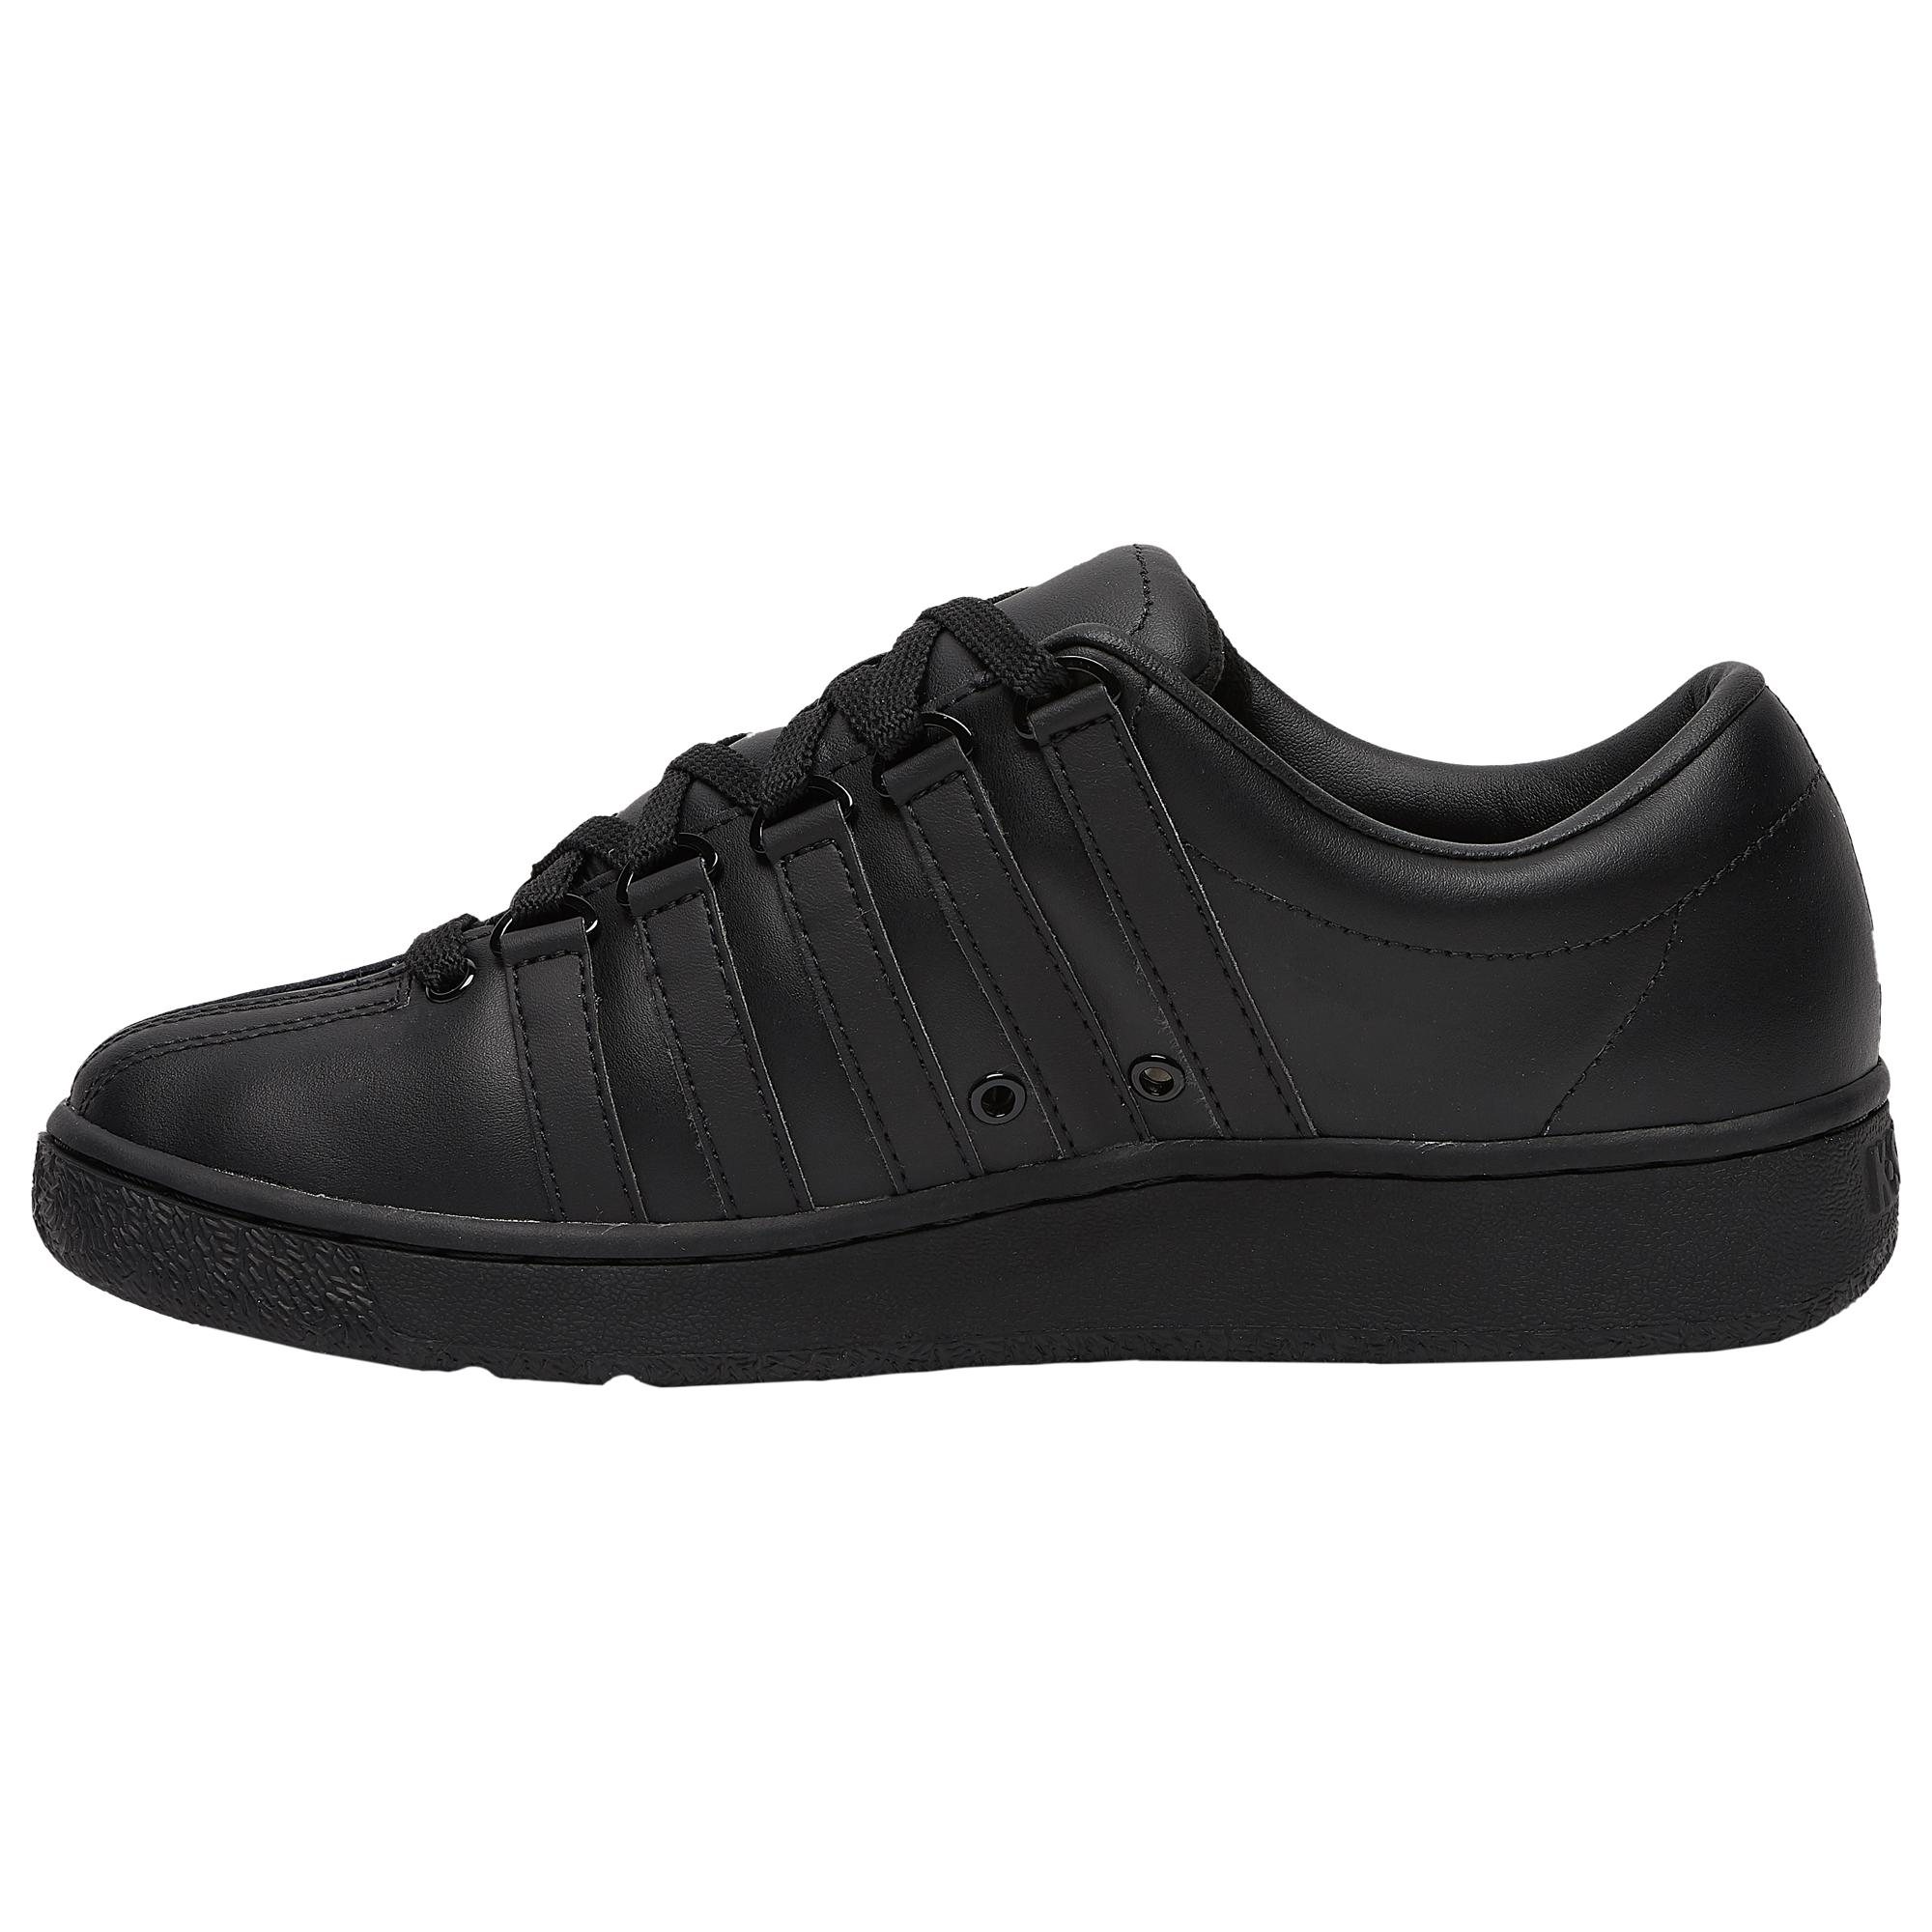 K-swiss Leather Classic 2000 - Shoes in Black/Black (Black) for Men - Lyst